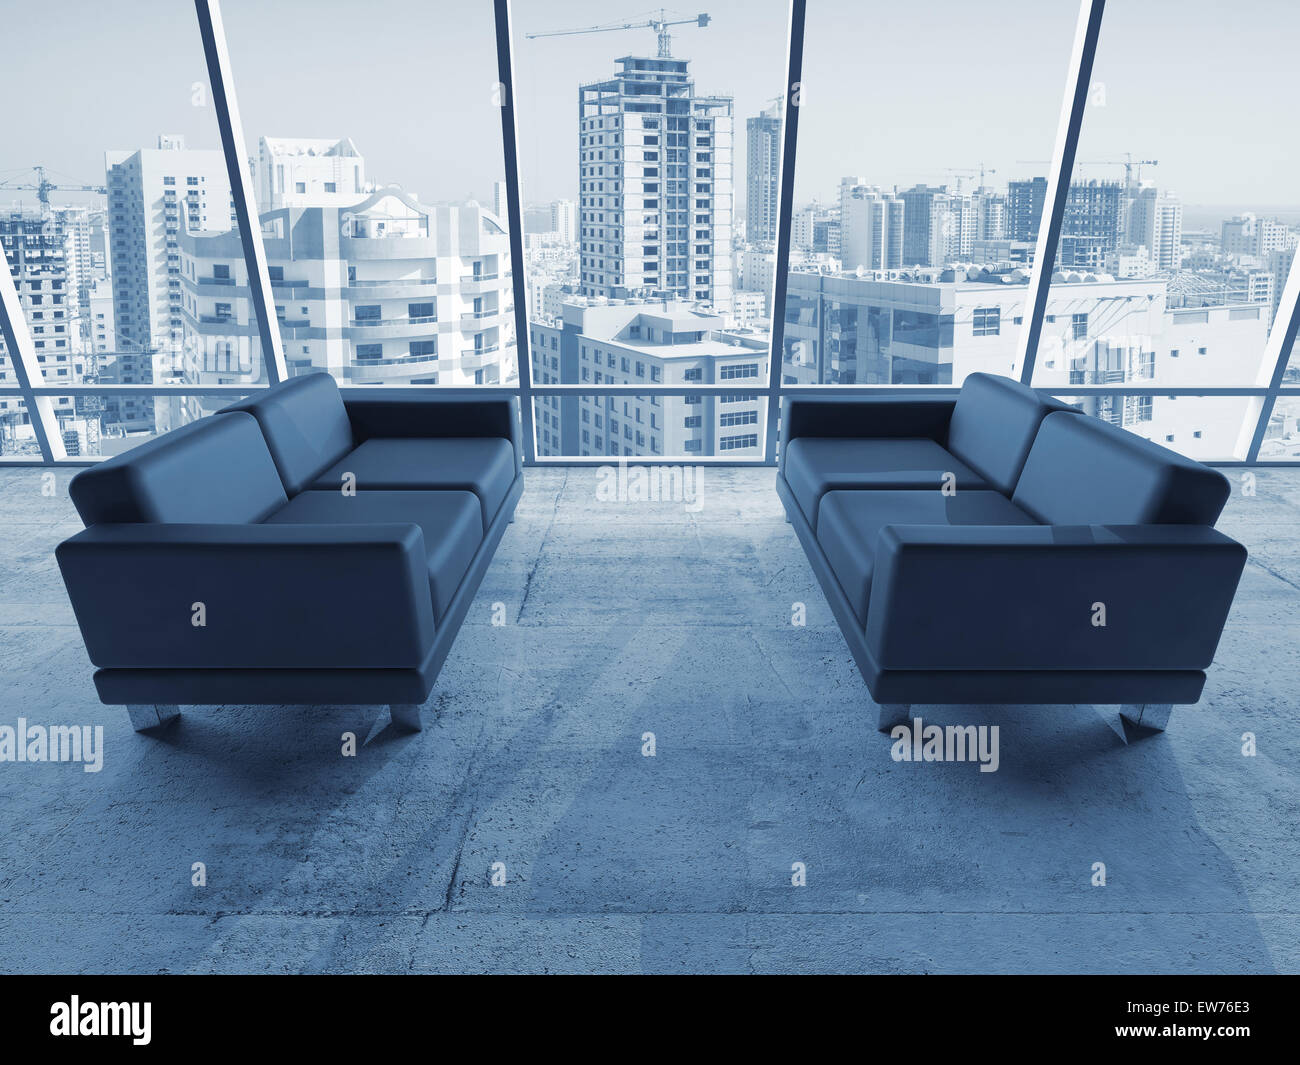 Abstract interior, office room with concrete floor, window and two black leather sofas, blue toned 3d illustration with cityscap Stock Photo